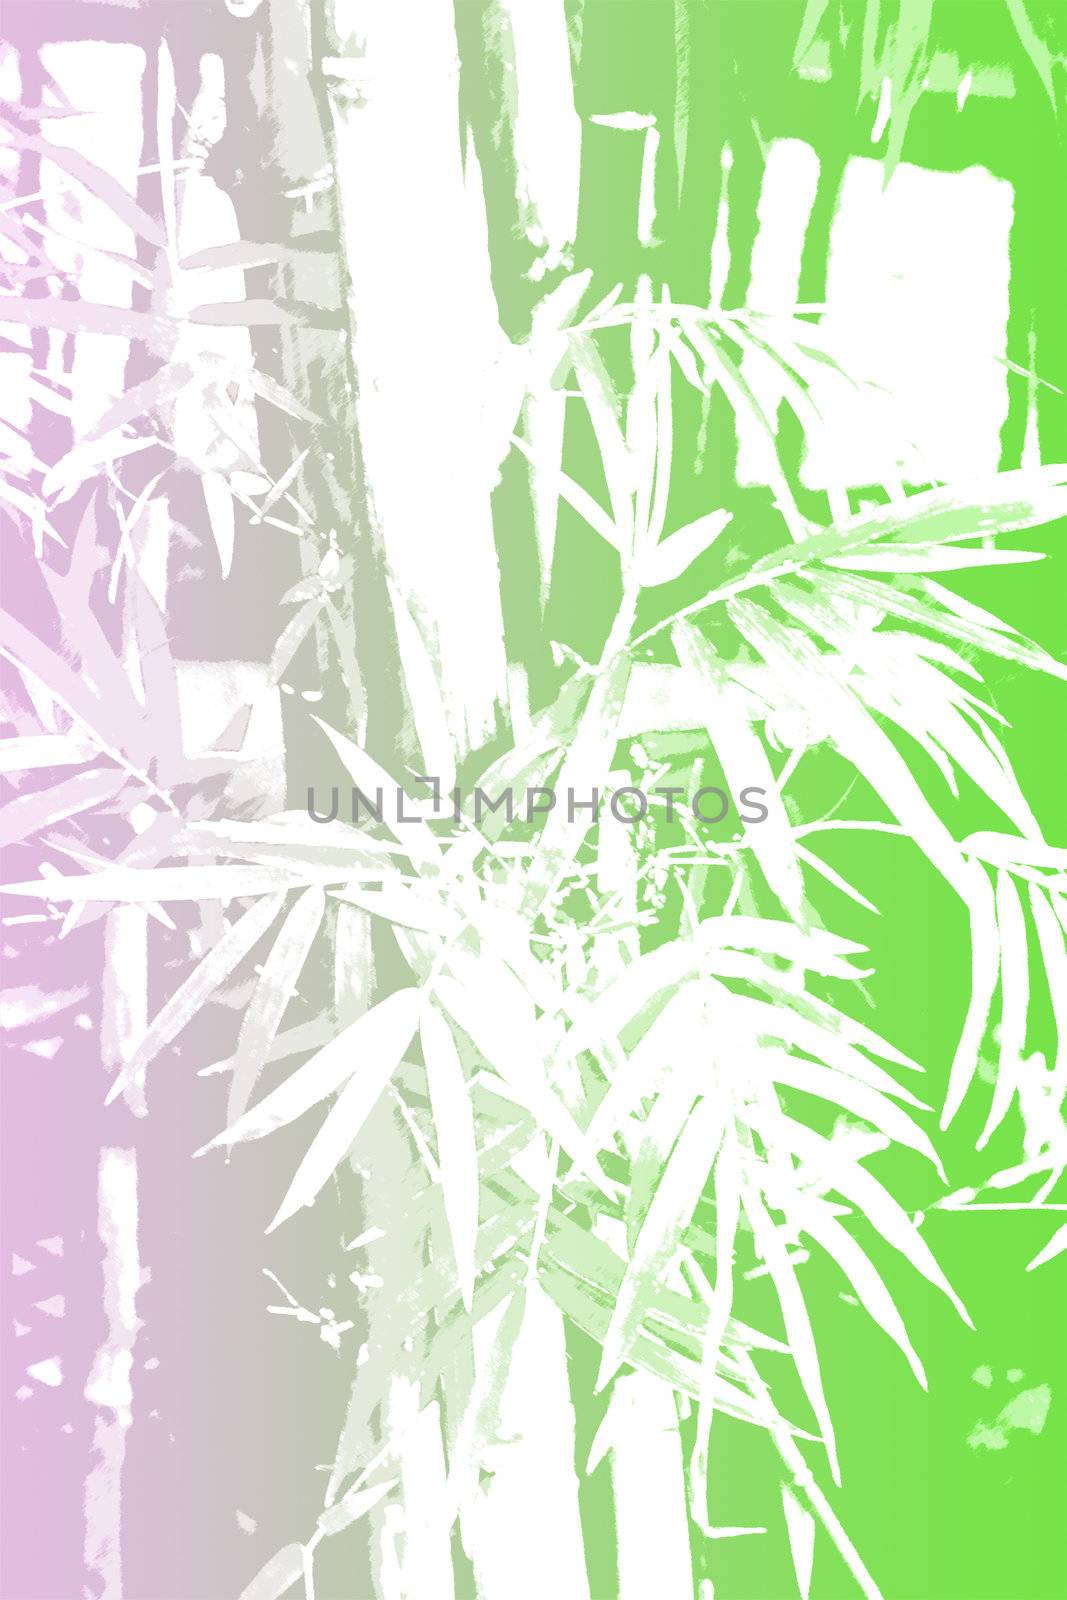 Bamboo Asian Abstract Background Wallpaper in Illustration Form